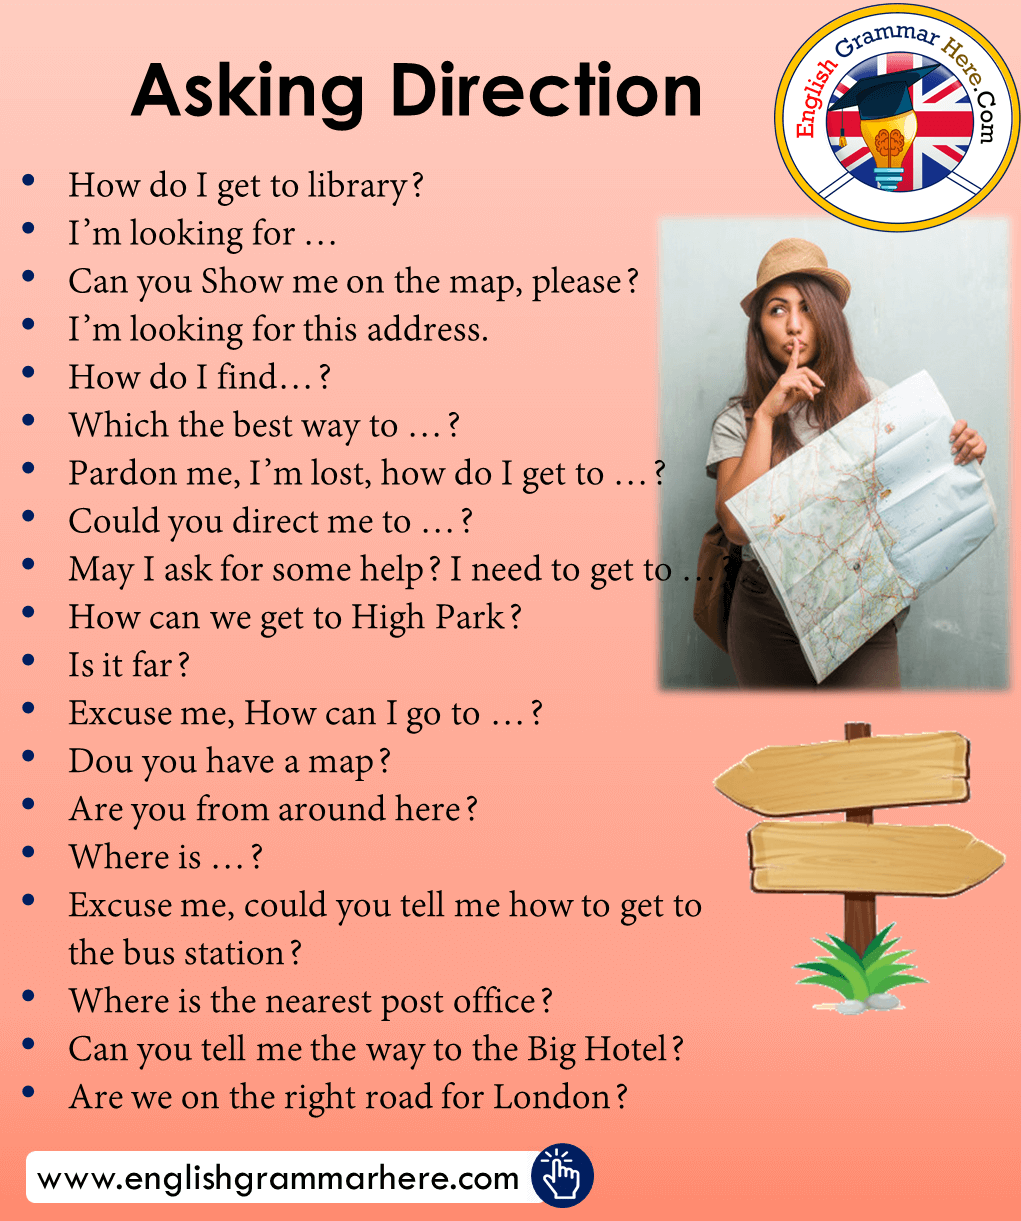 Asking Direction Phrases in English